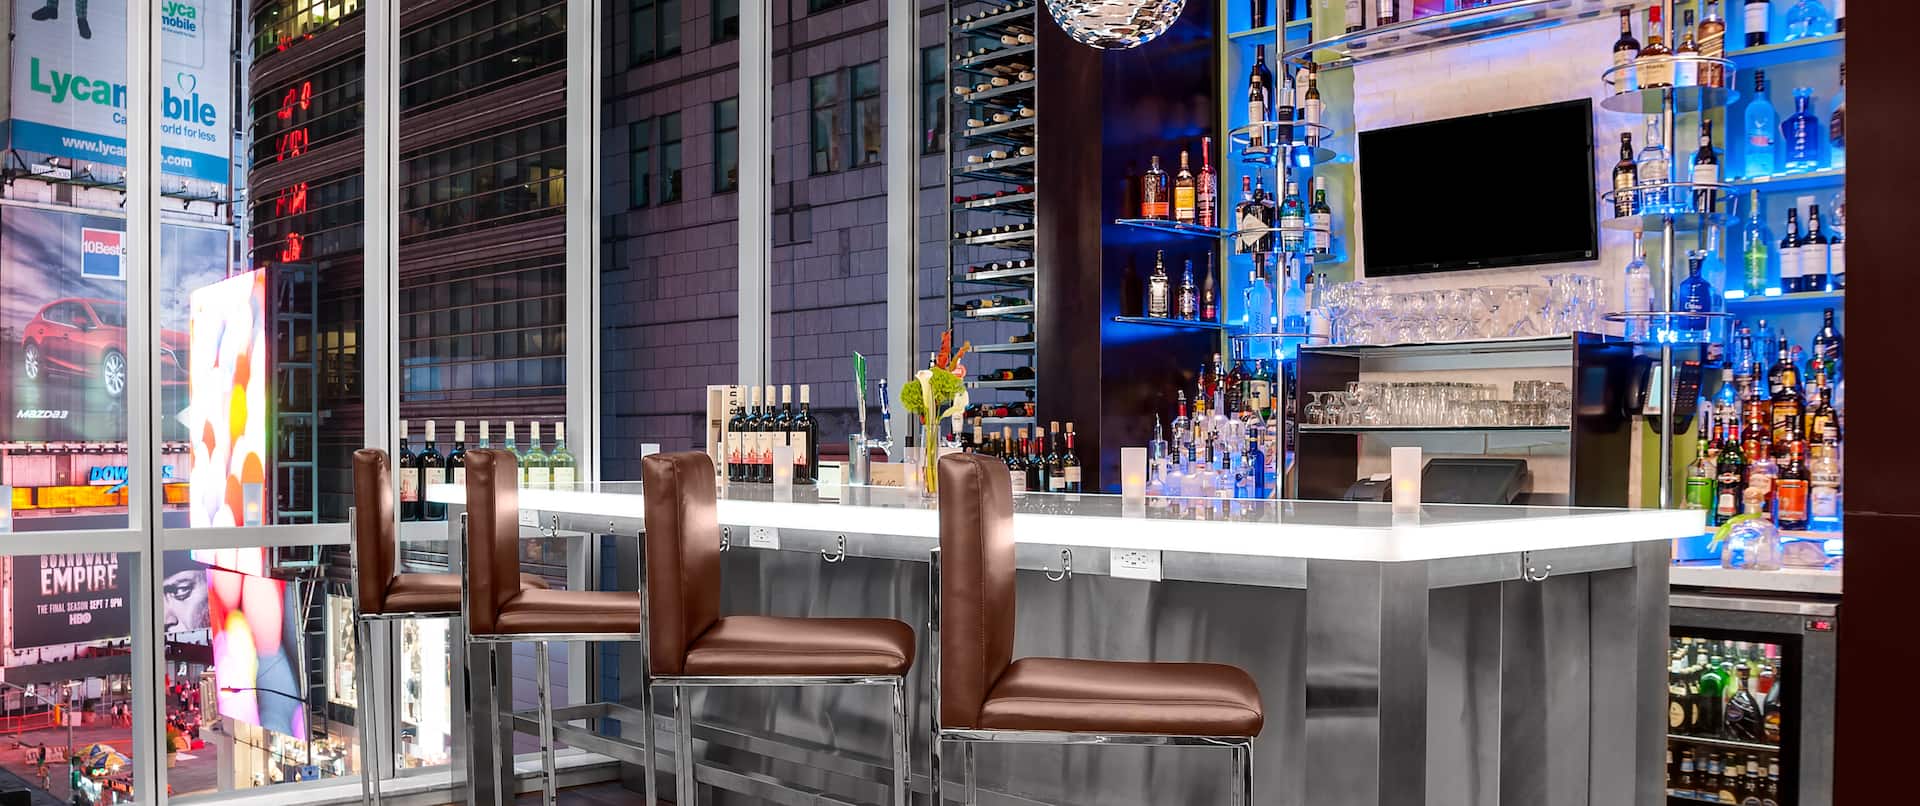 Lobby bar with barstools, bottles on shelves and city view from large window